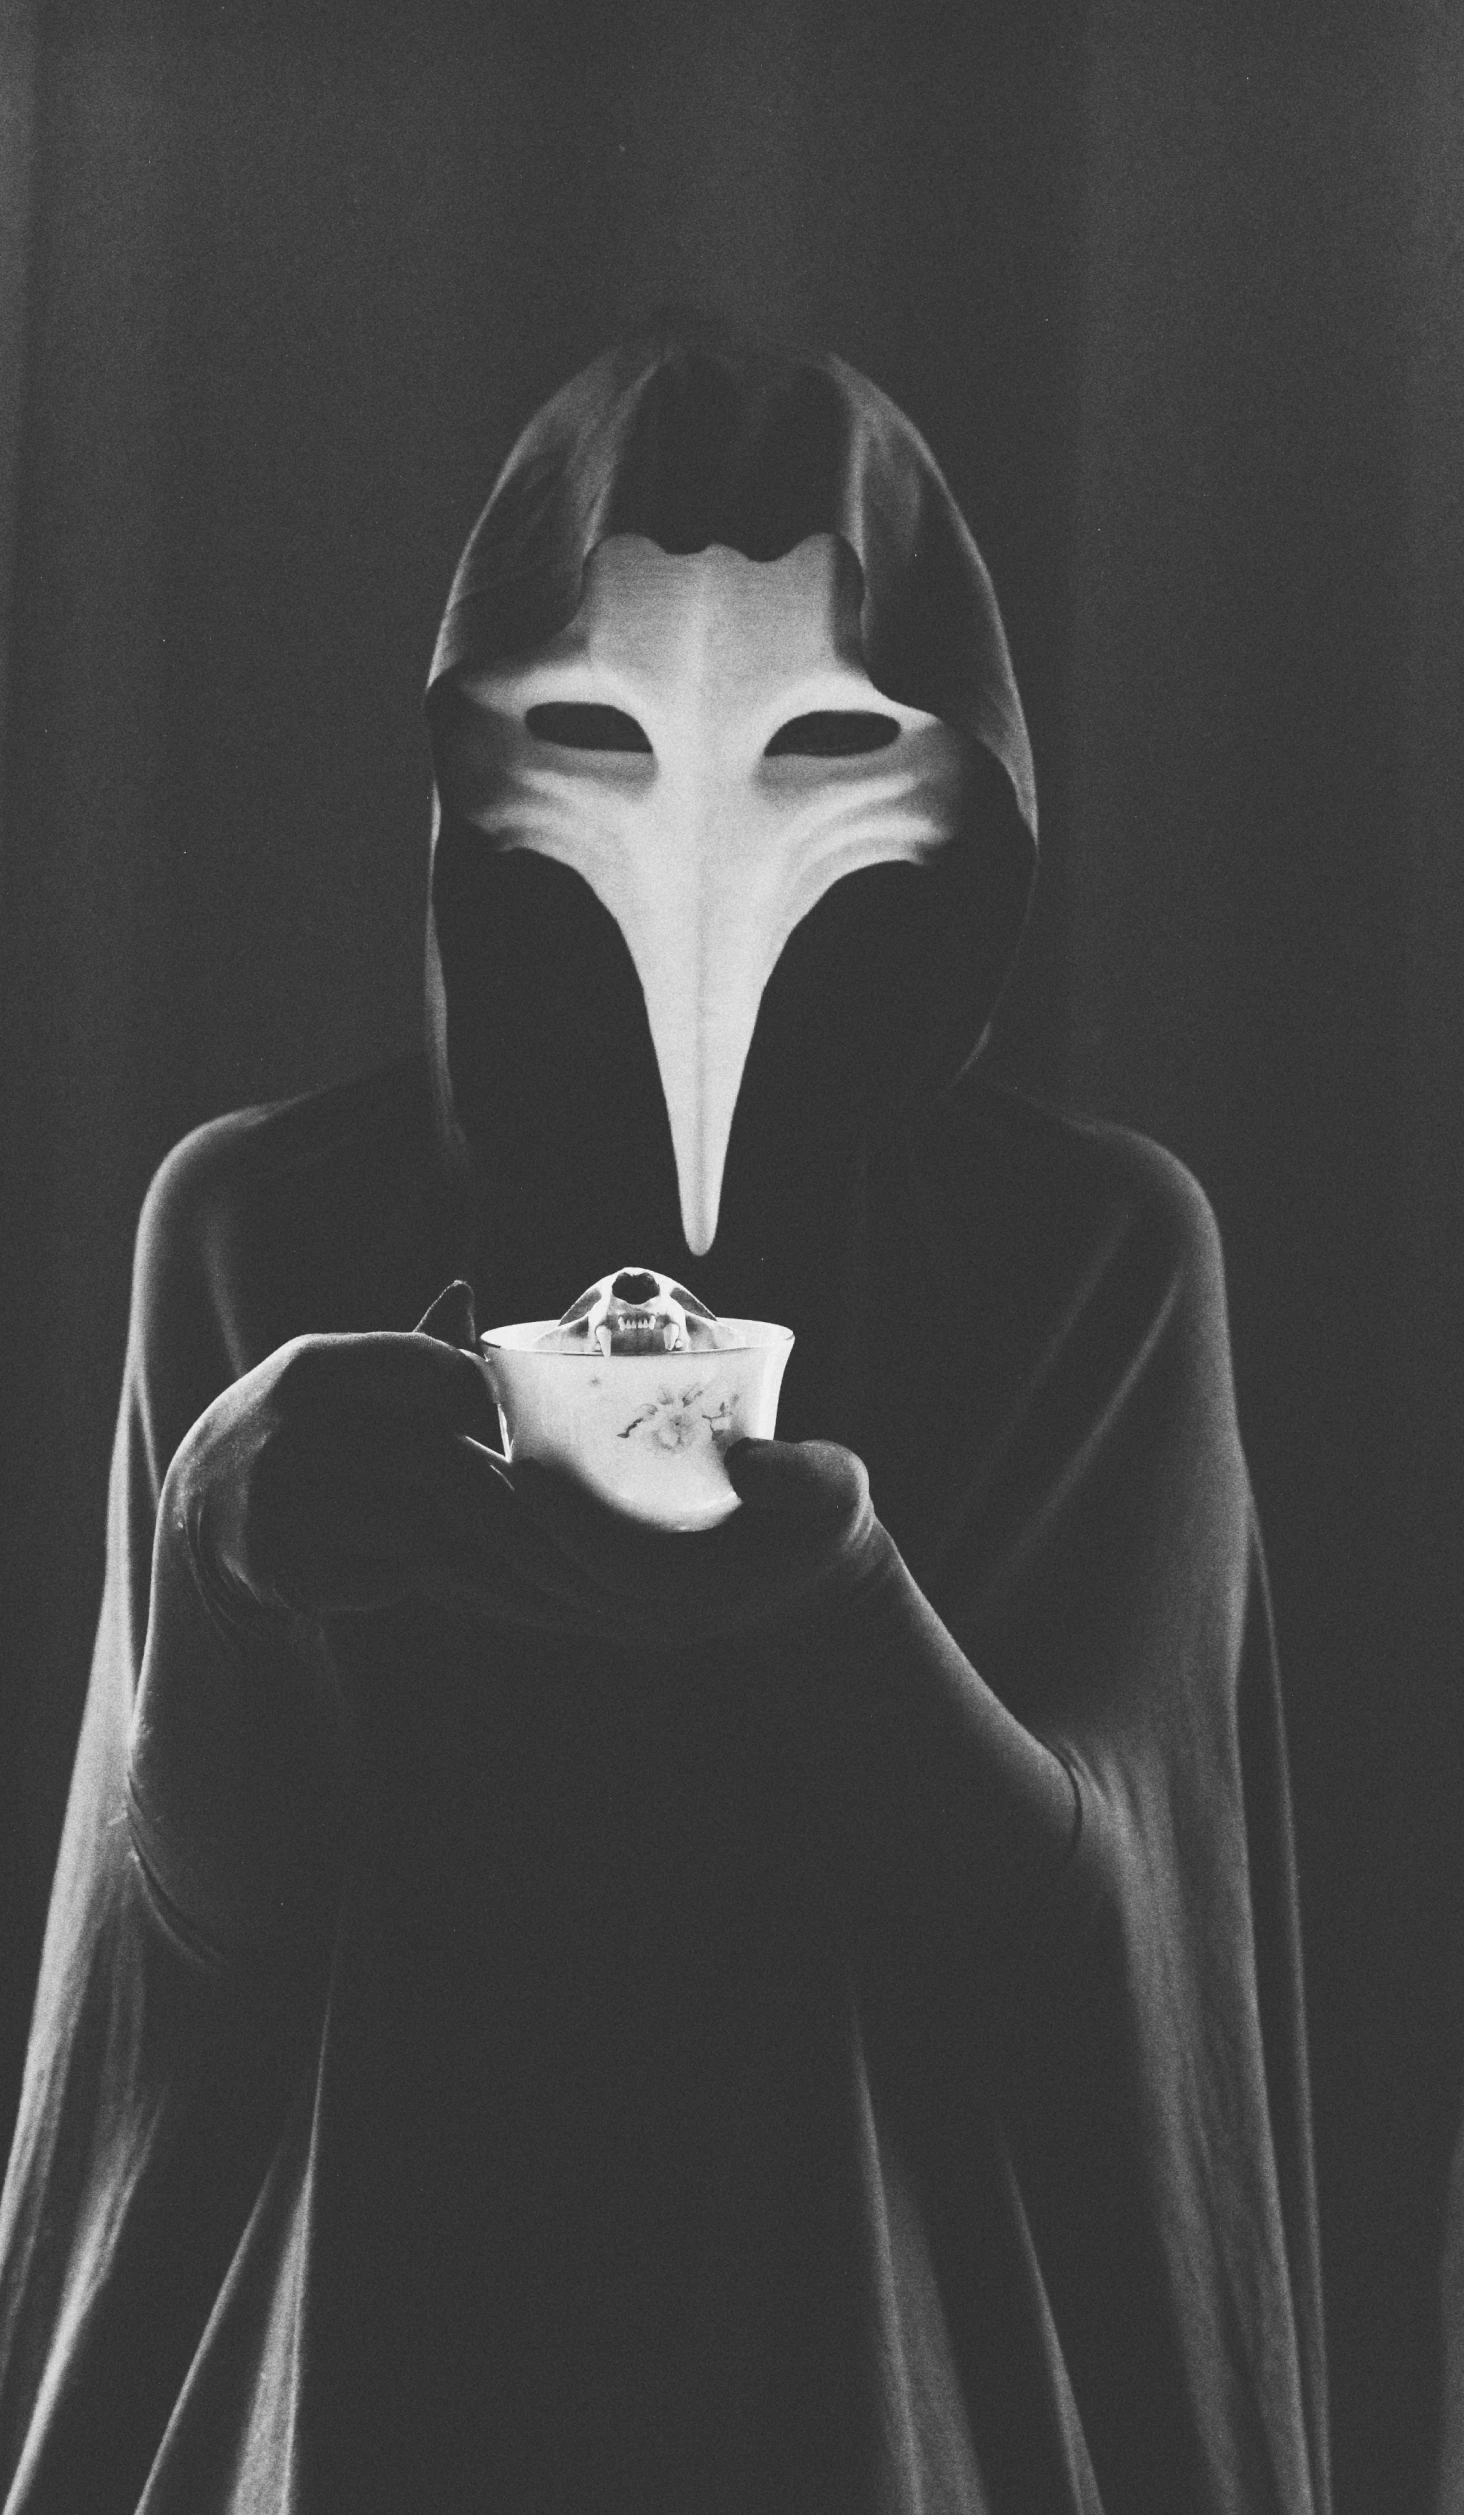 a black and white photo of a person holding a cup, inspired by Pietro Longhi, aestheticism, plague mask, /!\ the sorceress, adim kashin, morning coffee